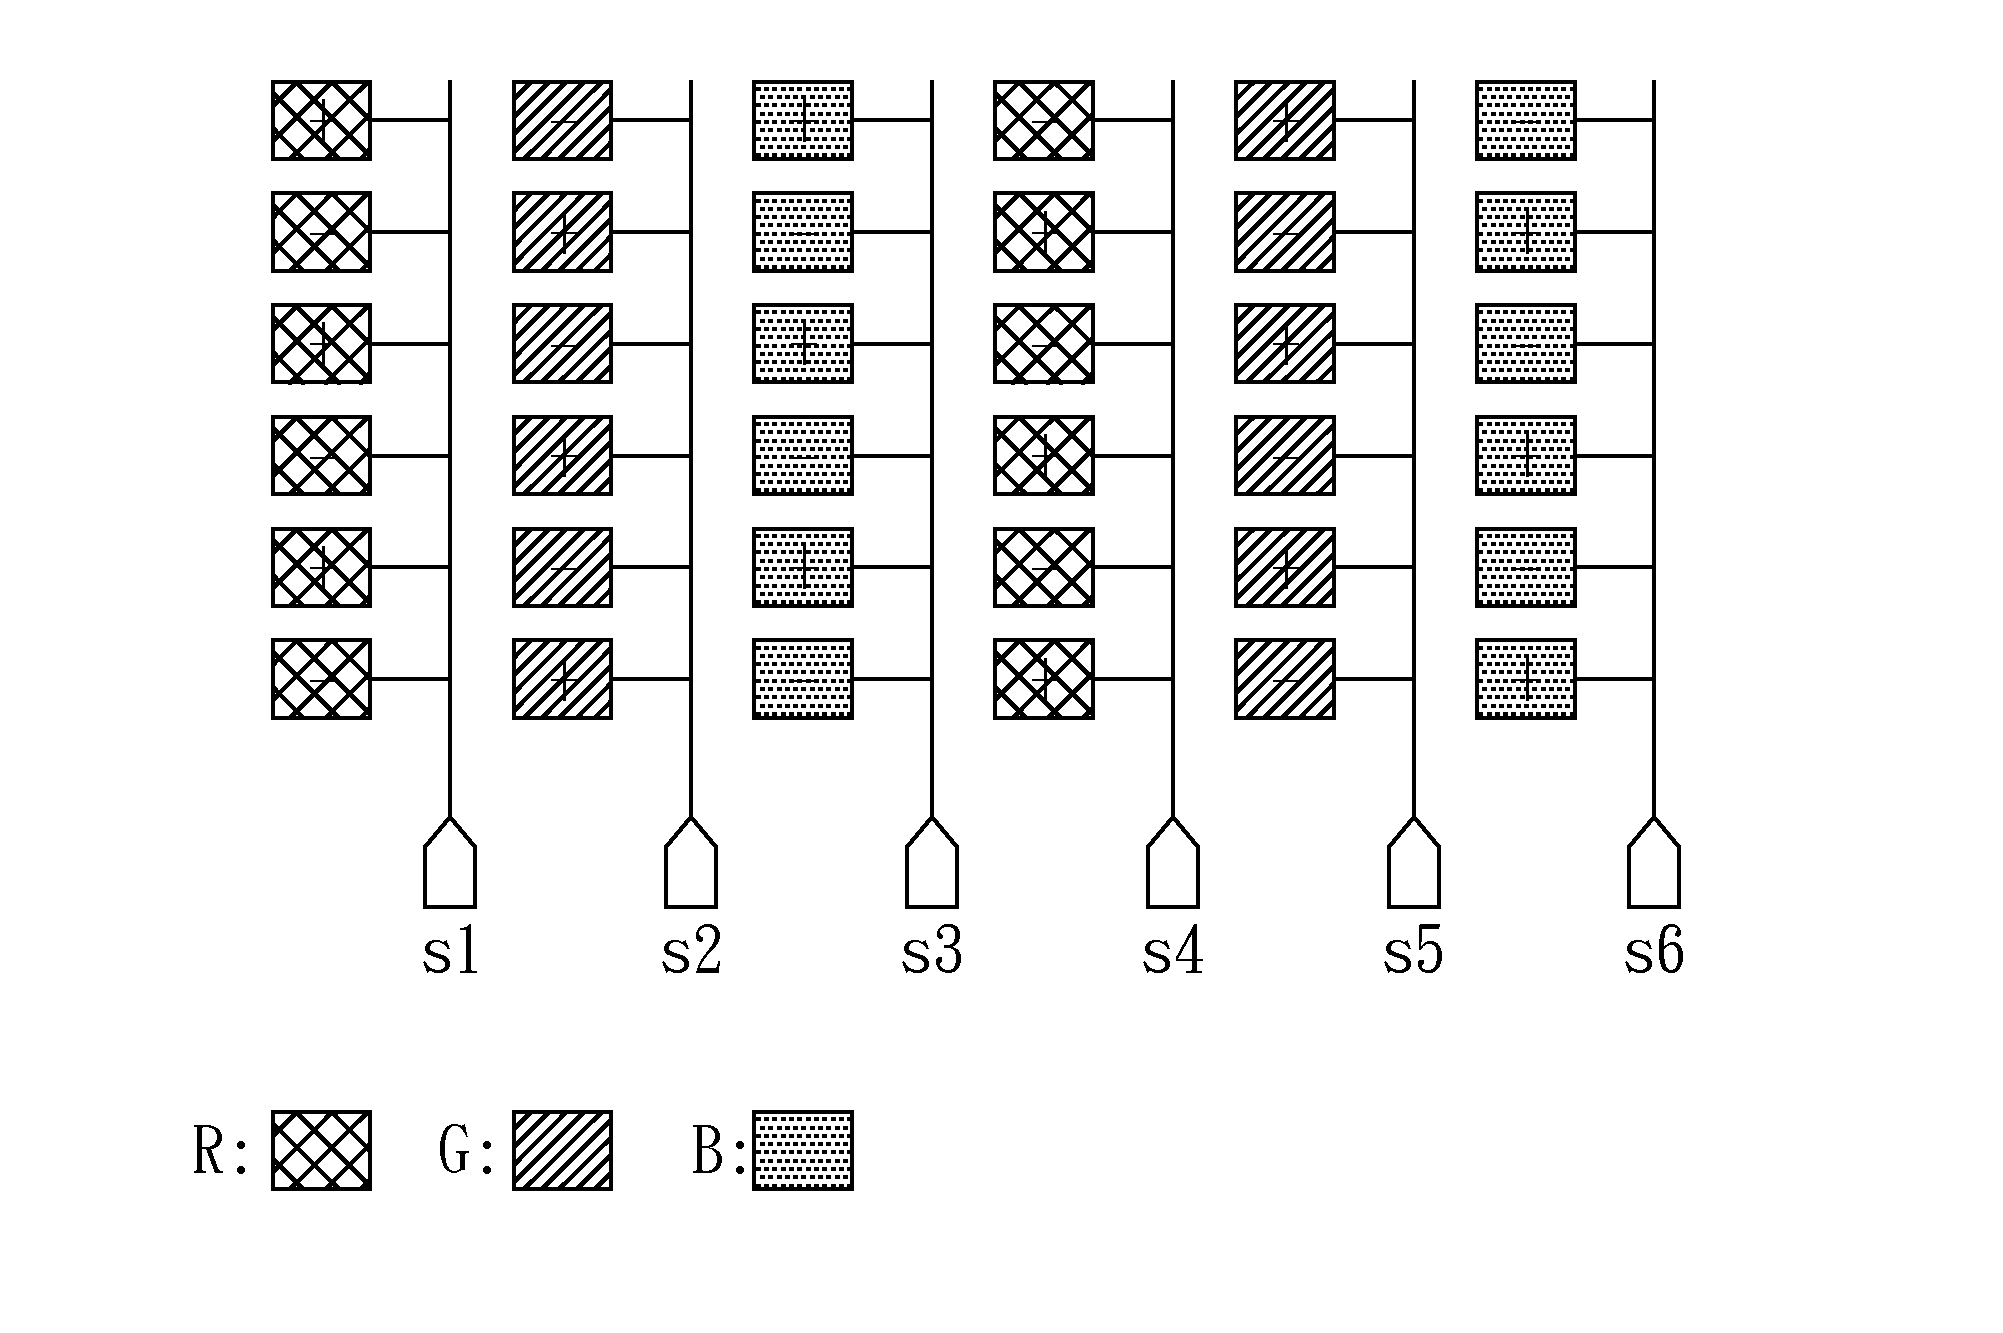 Method of dynamic charge sharing for a display device